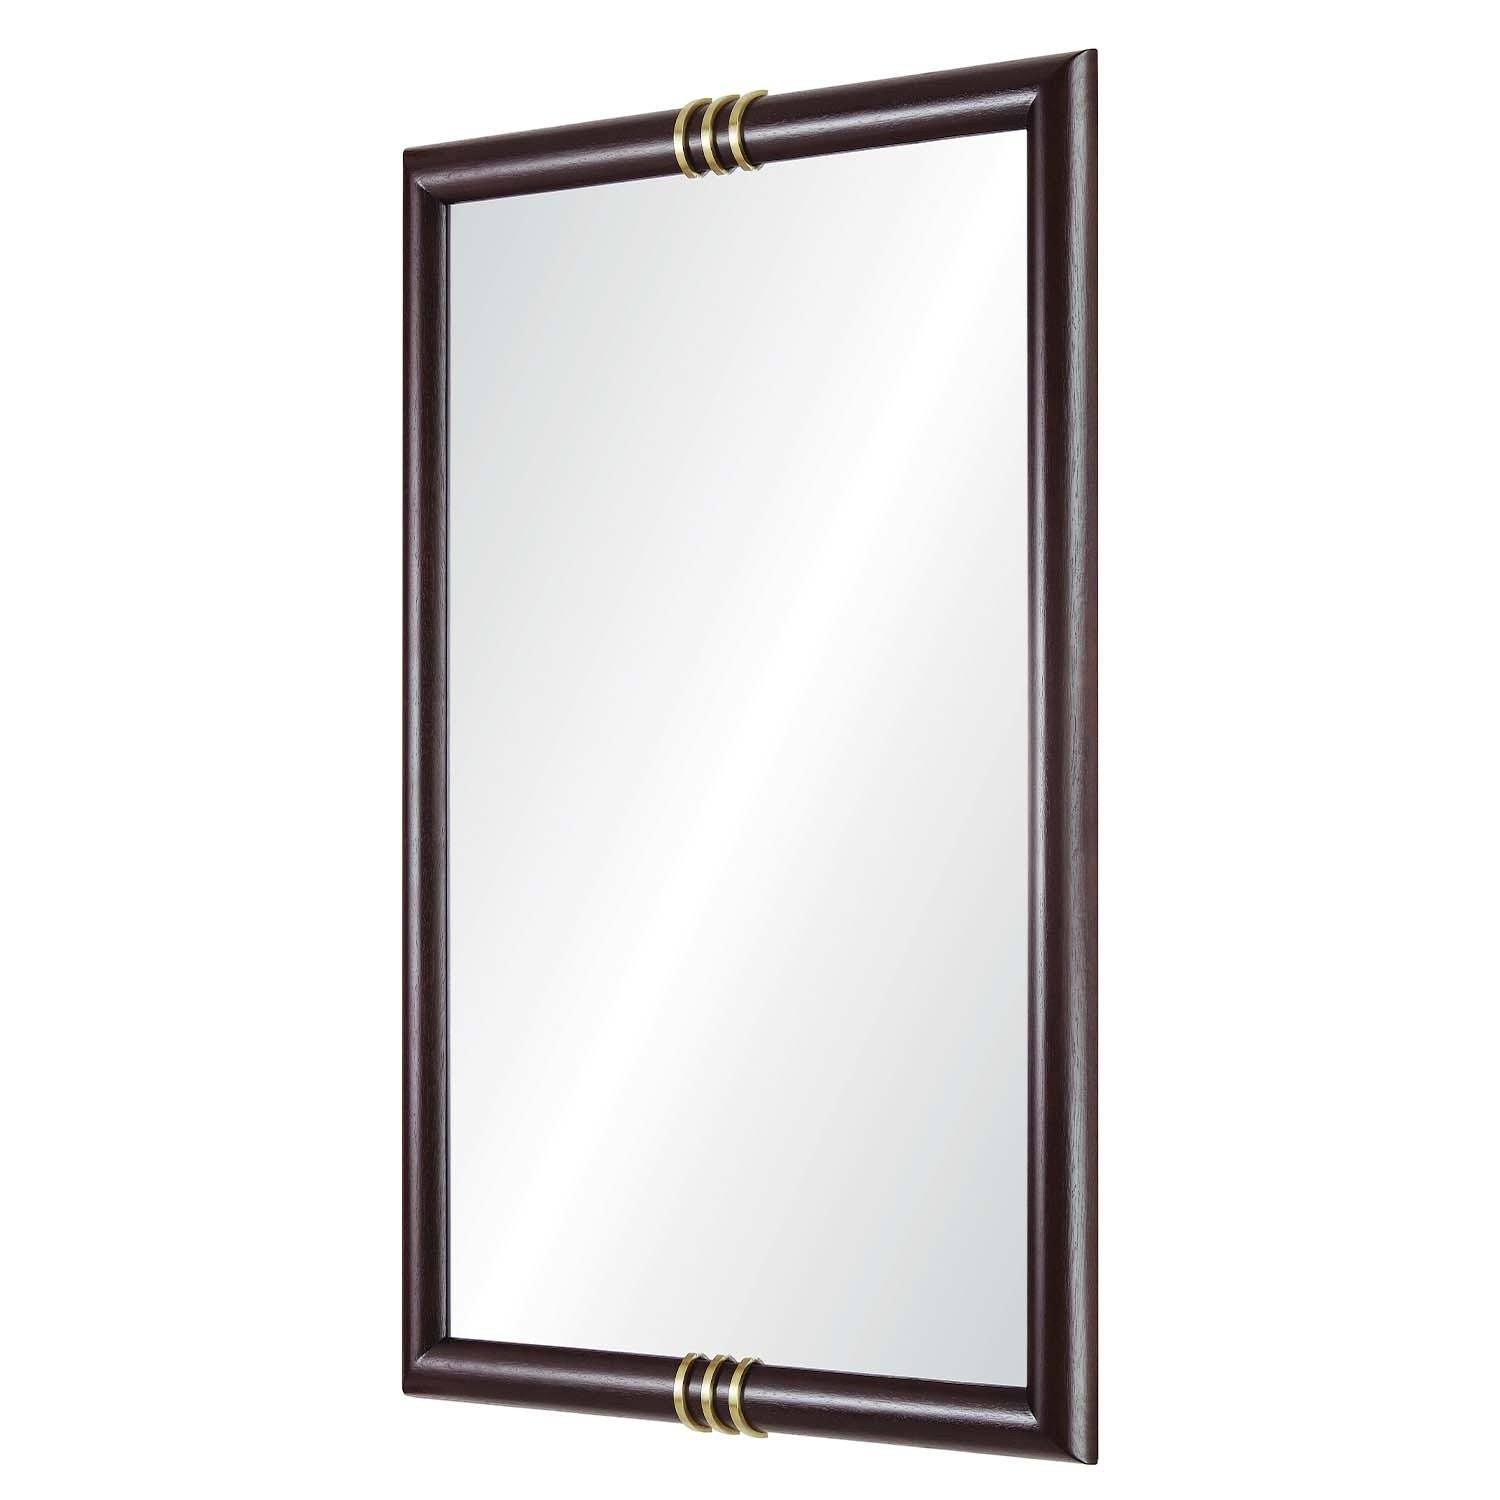 Fig Linens - Mirror Home - Dark Mahogany & Brass Wall Mirror by Celerie Kemble - Side